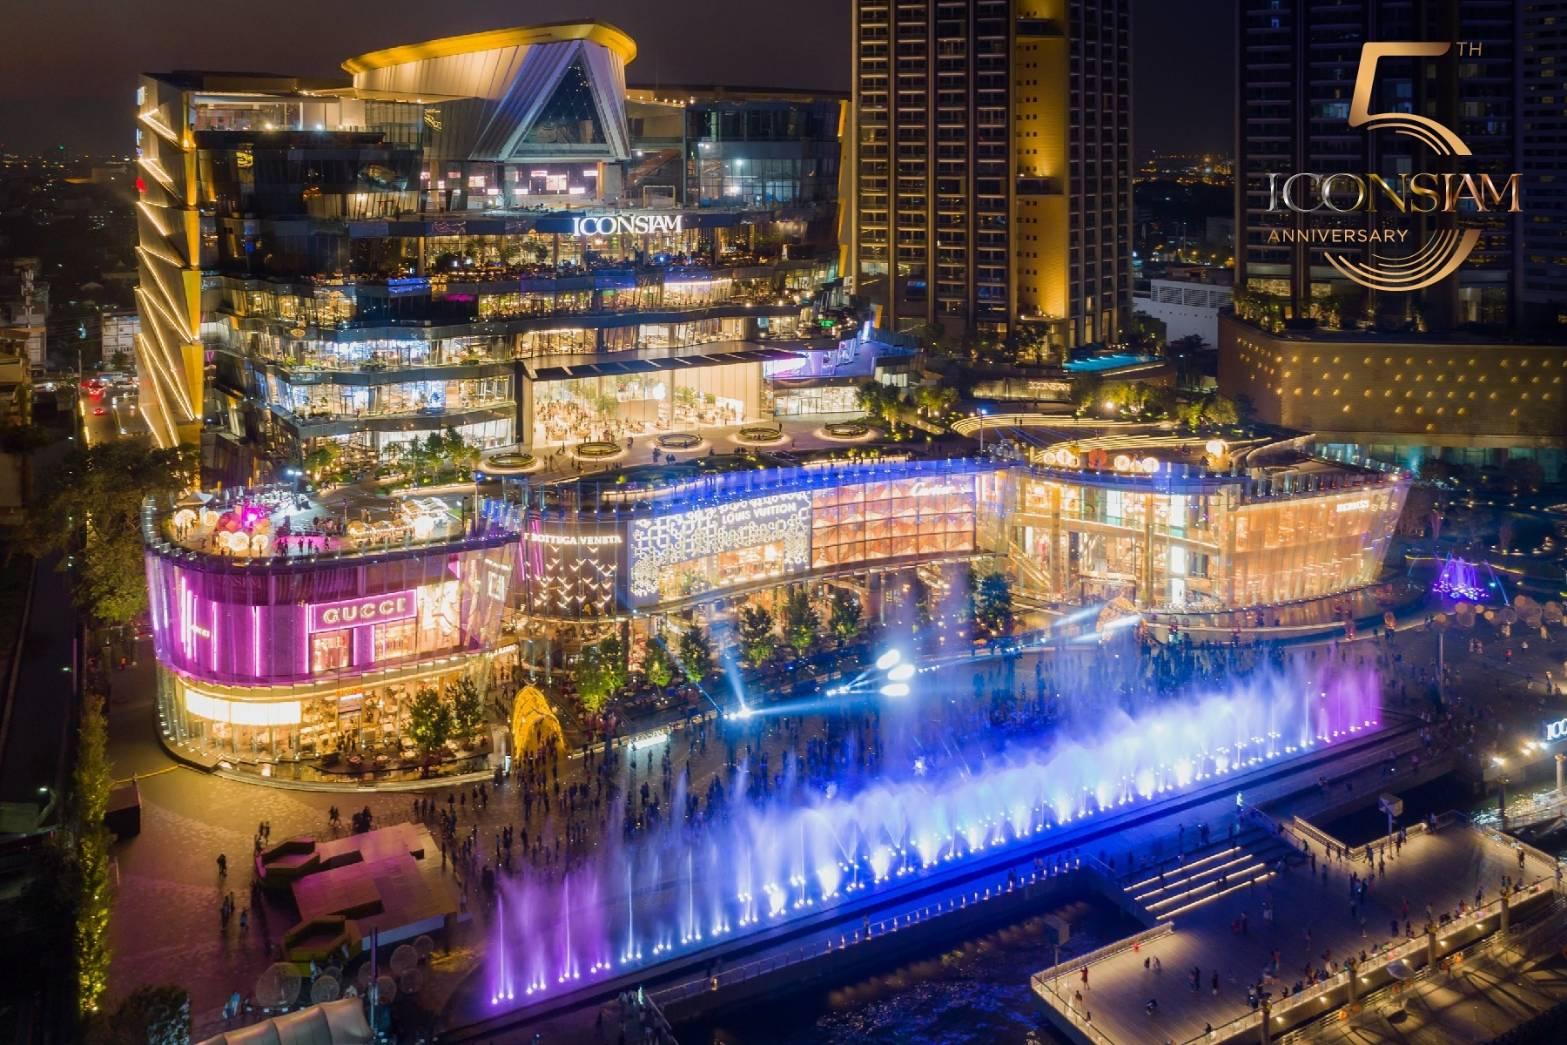 ICONSIAM : WHAT YOU NEED TO KNOW ABOUT ICONSIAM IN 5 MINUTES